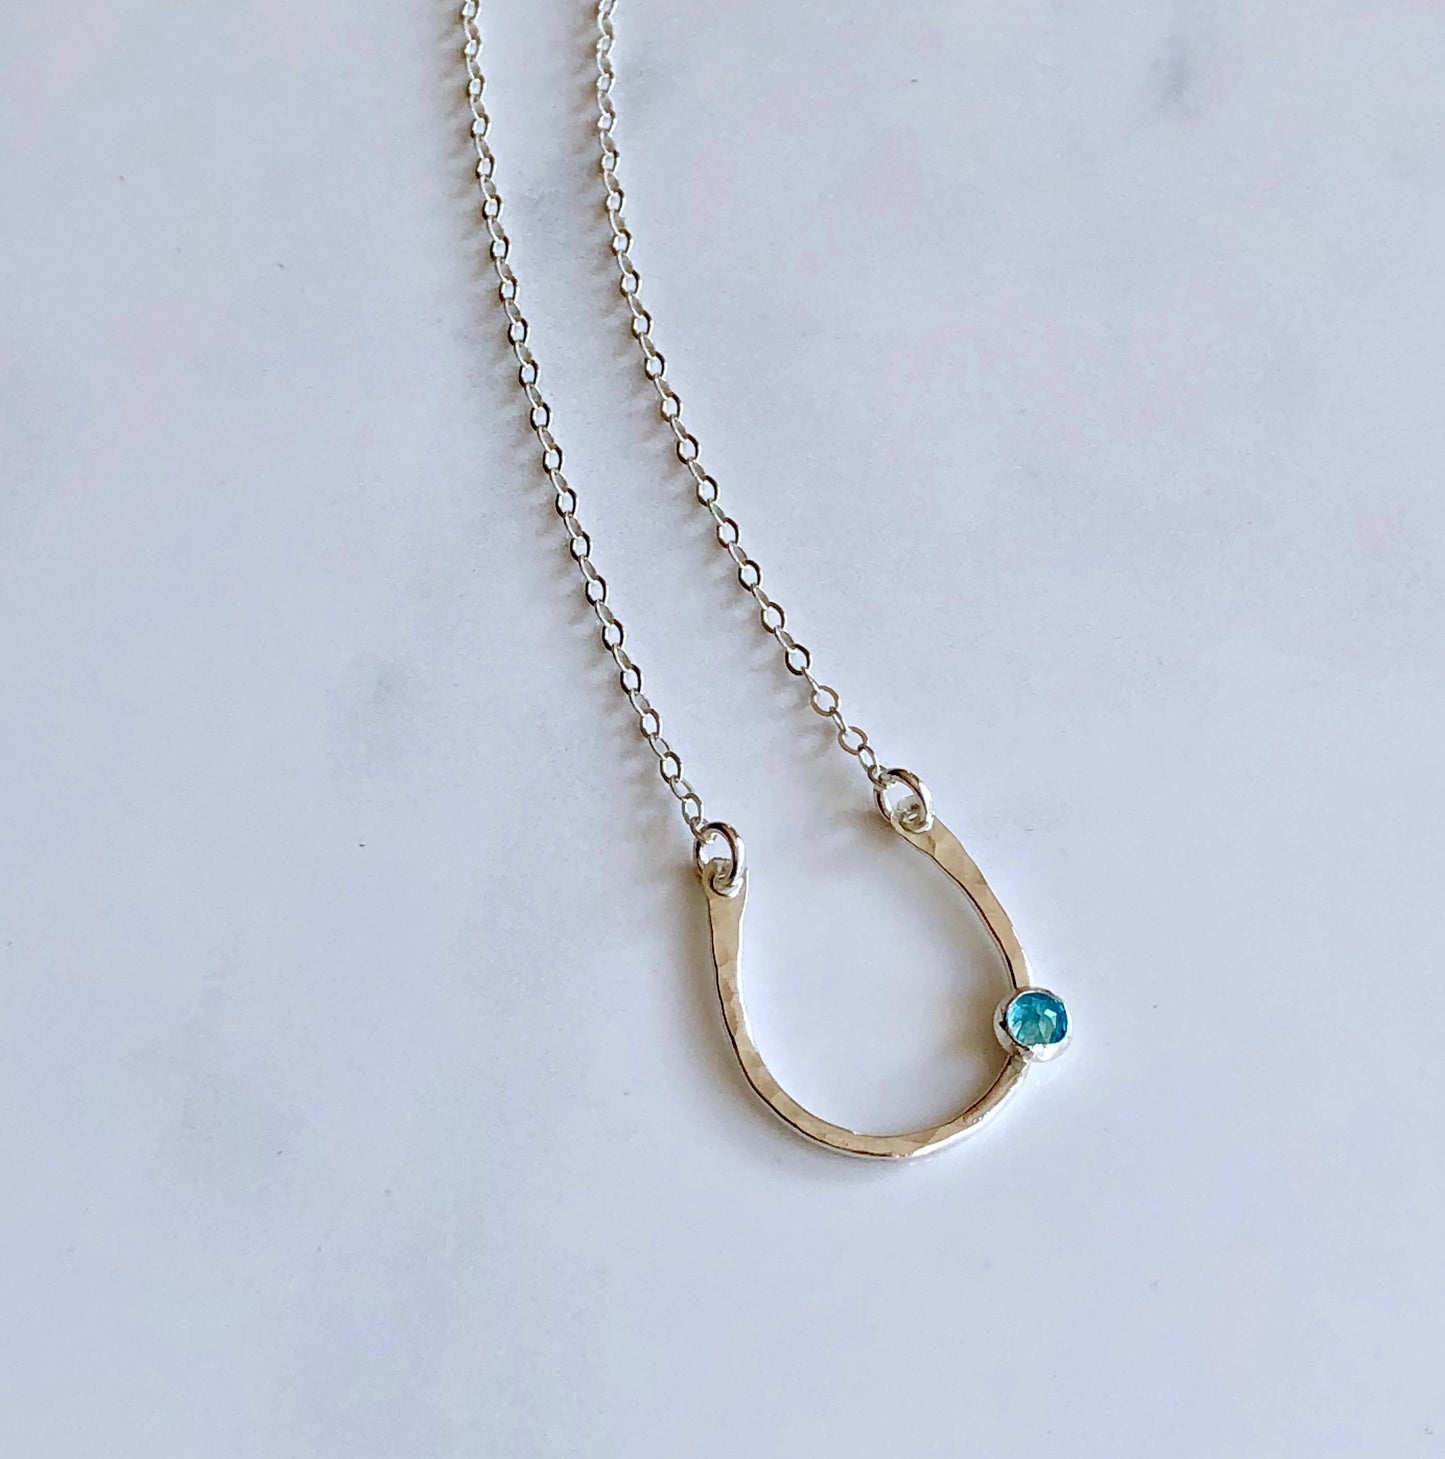 Lucky horseshoe necklace-sterling silver: Opal